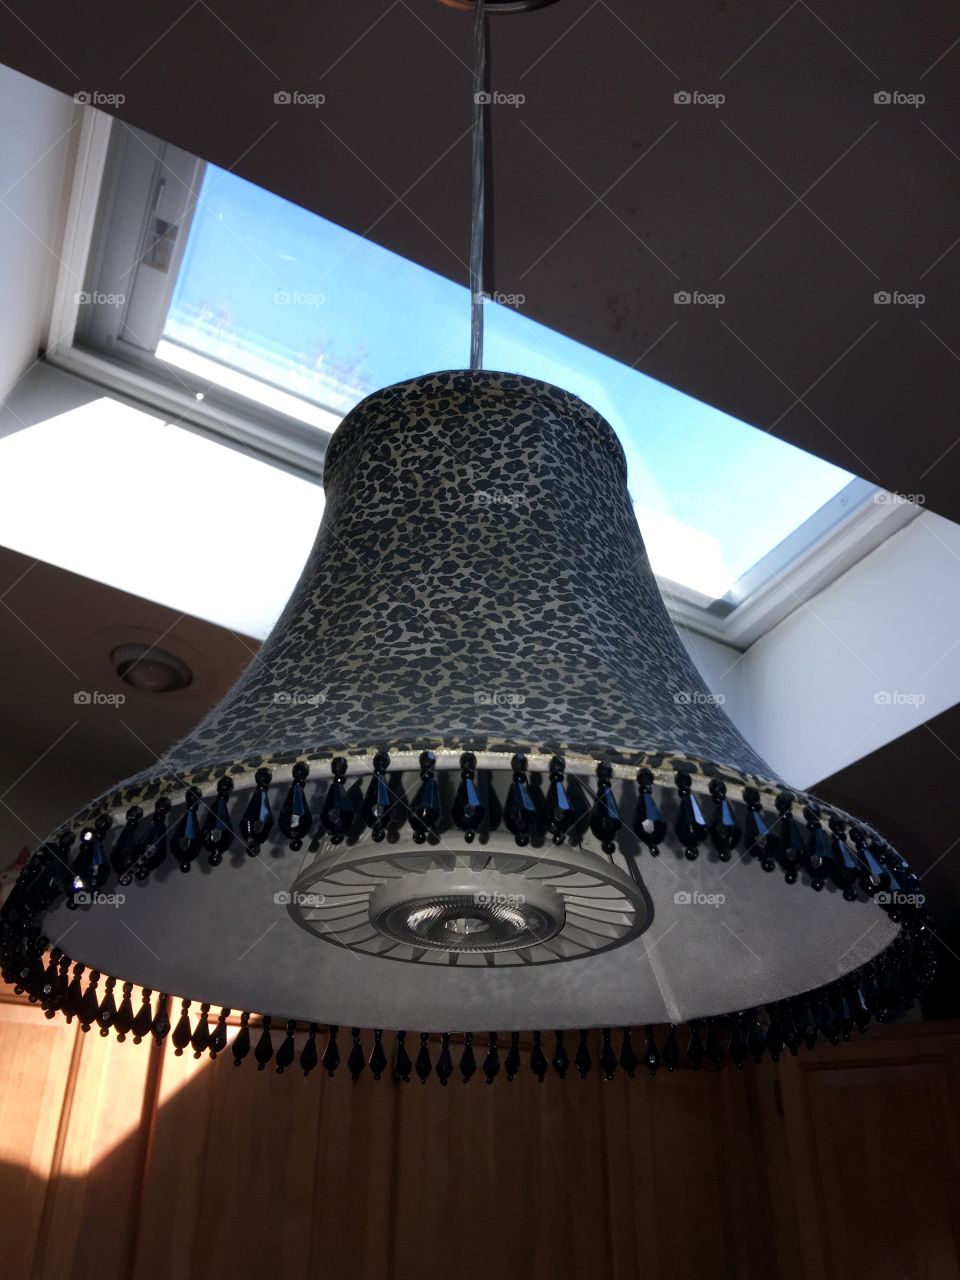 Drop LED spotlight in my kitchen hanging over my oak butcher block. The shade is leopard print with beads hanging, a reflection of me!😊One of the two skylights is visible in this pic, blue sky today.